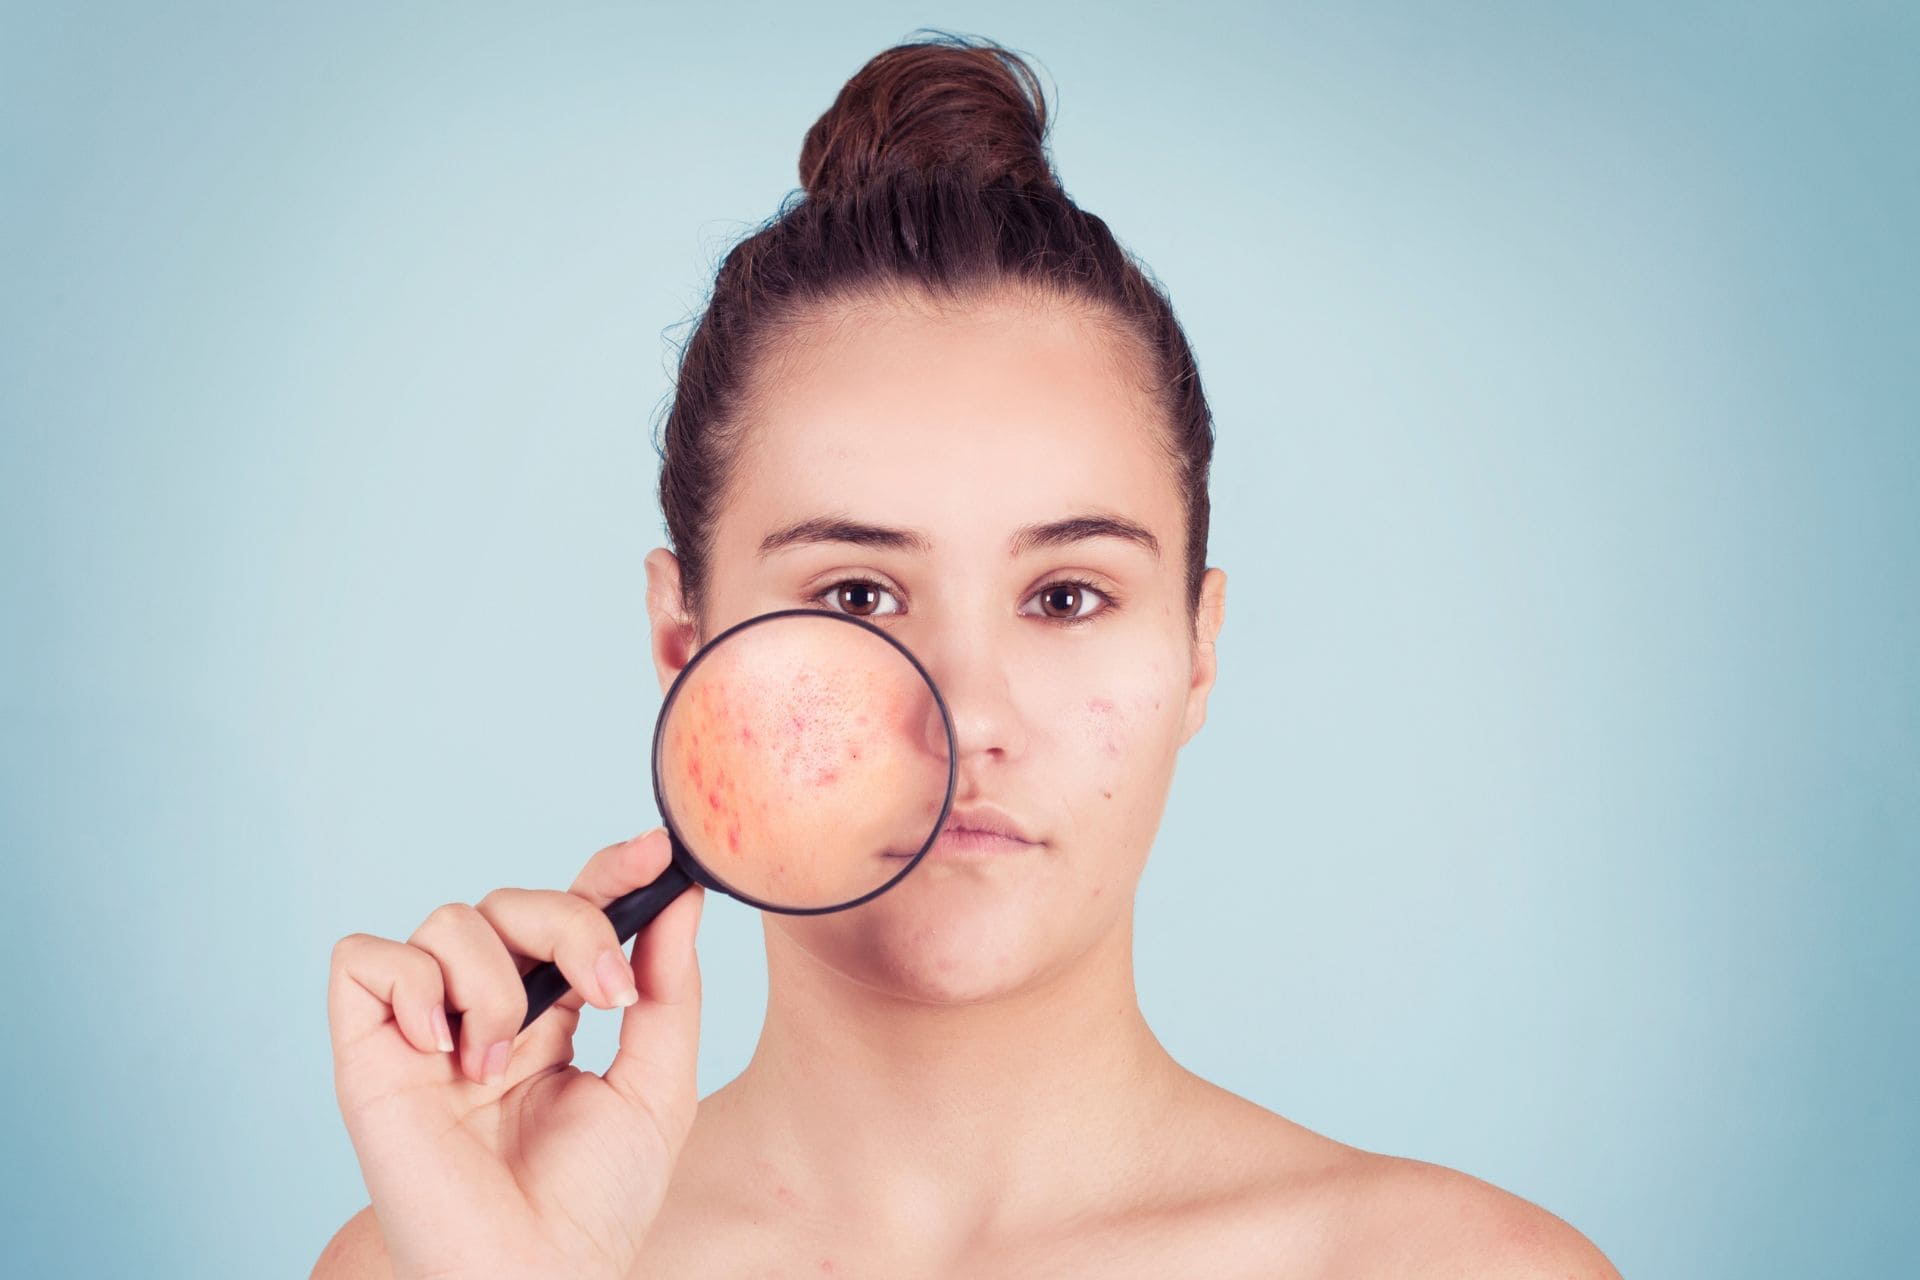 What You Need To Know About Acne And How To Treat It